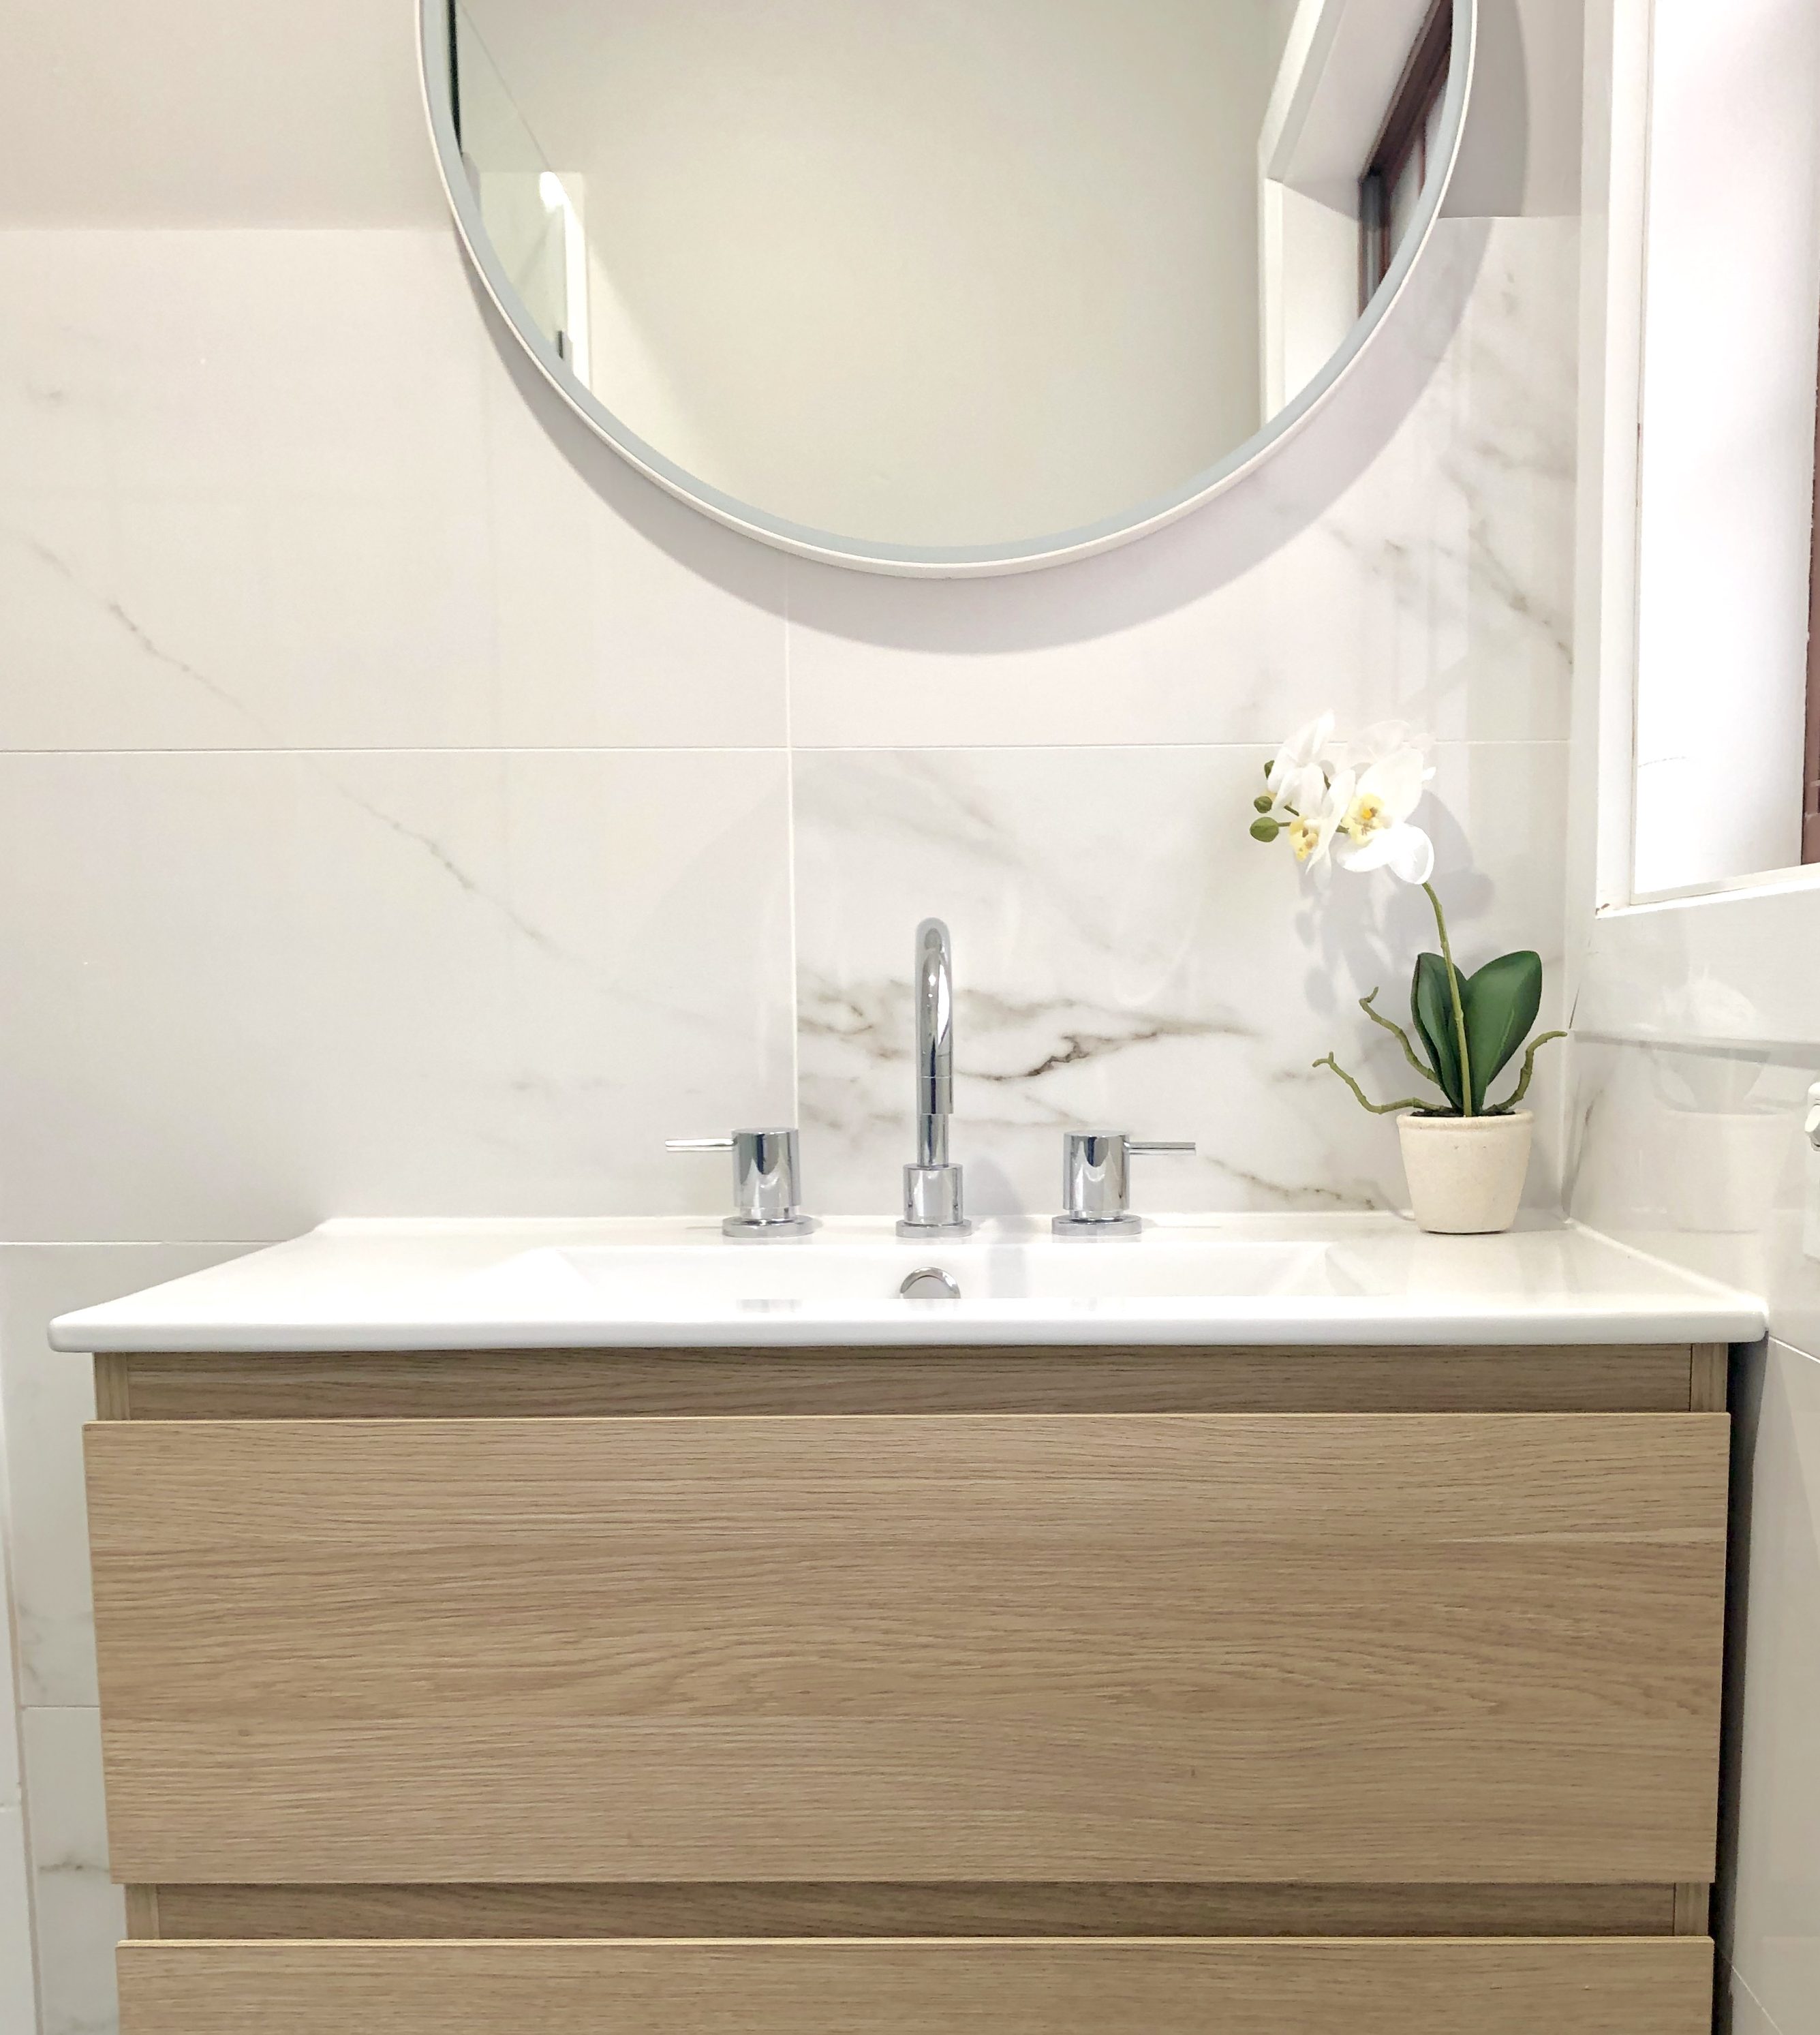 Gorgeous faux marble tiles with timber wall hung vanity and round mirror - bathroom renovation by Master Bathrooms & Kitchens.